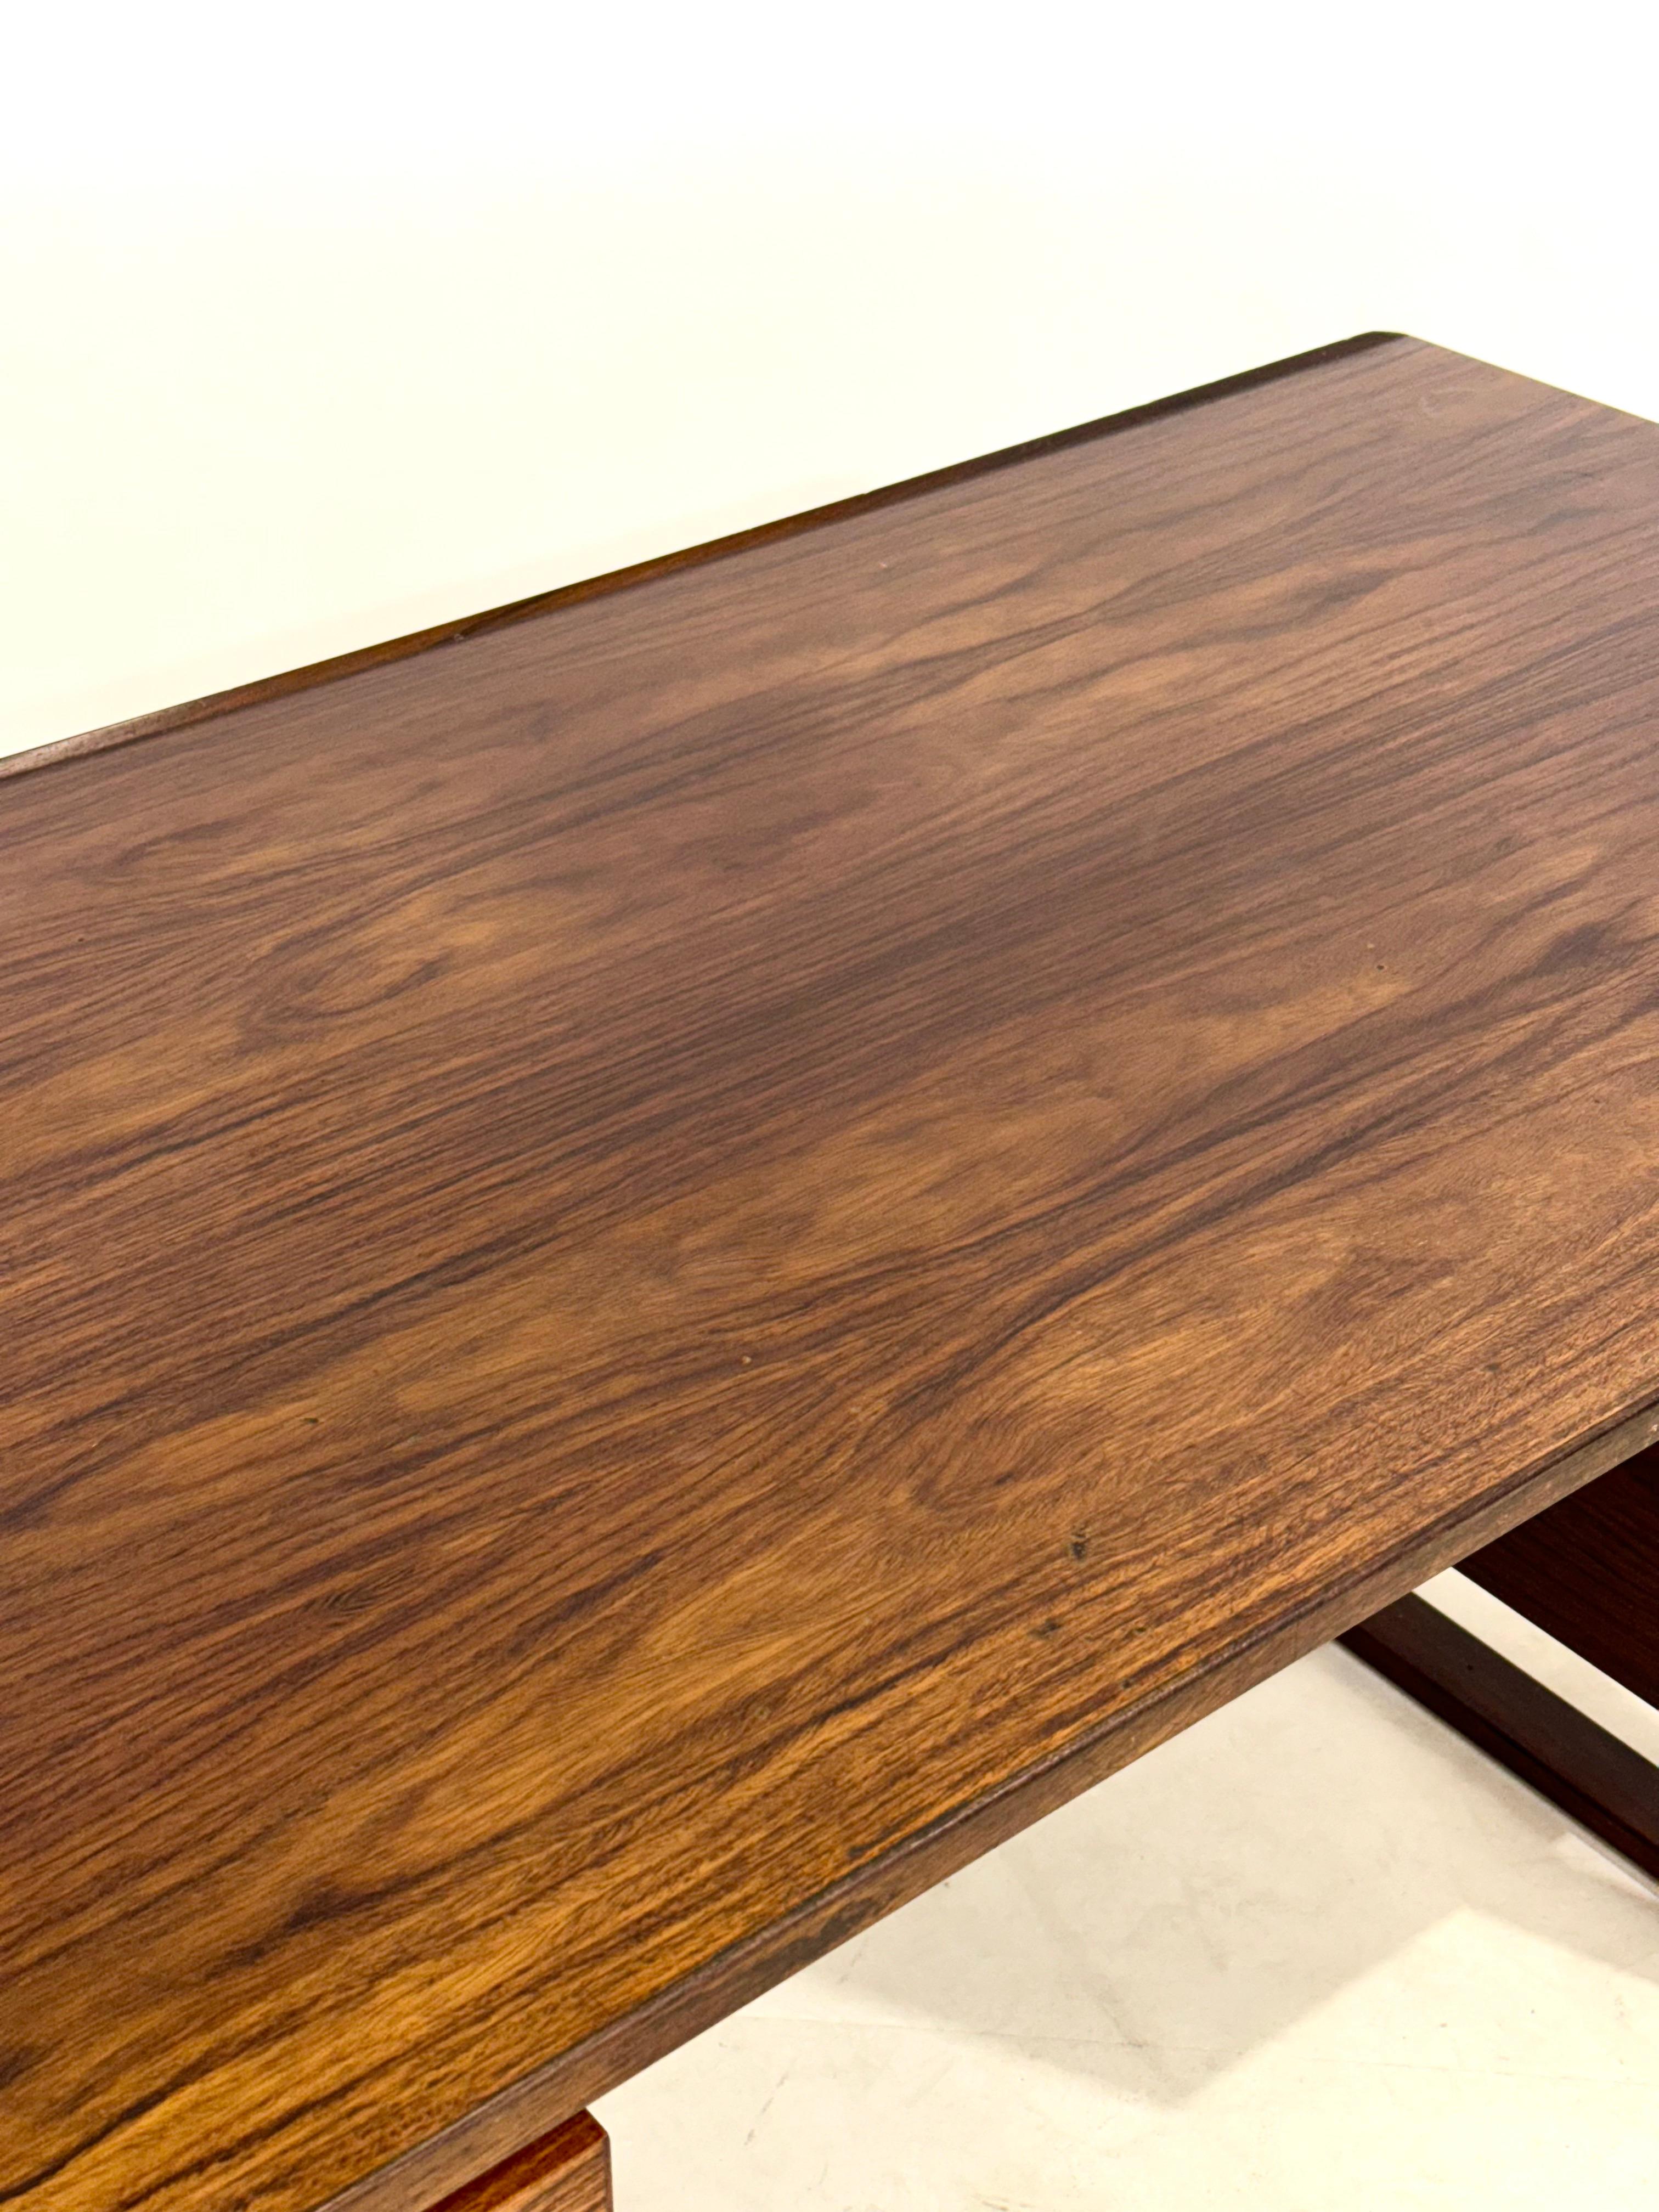 A fantastic rosewood desk designed by Henning Jensen & Torben Valeur manufactured by Munch Mobler in Denmark around 1960.

Standing on two rectangular legs with beautiful  On both sides the piece has three drawer units with rectangular handles in a